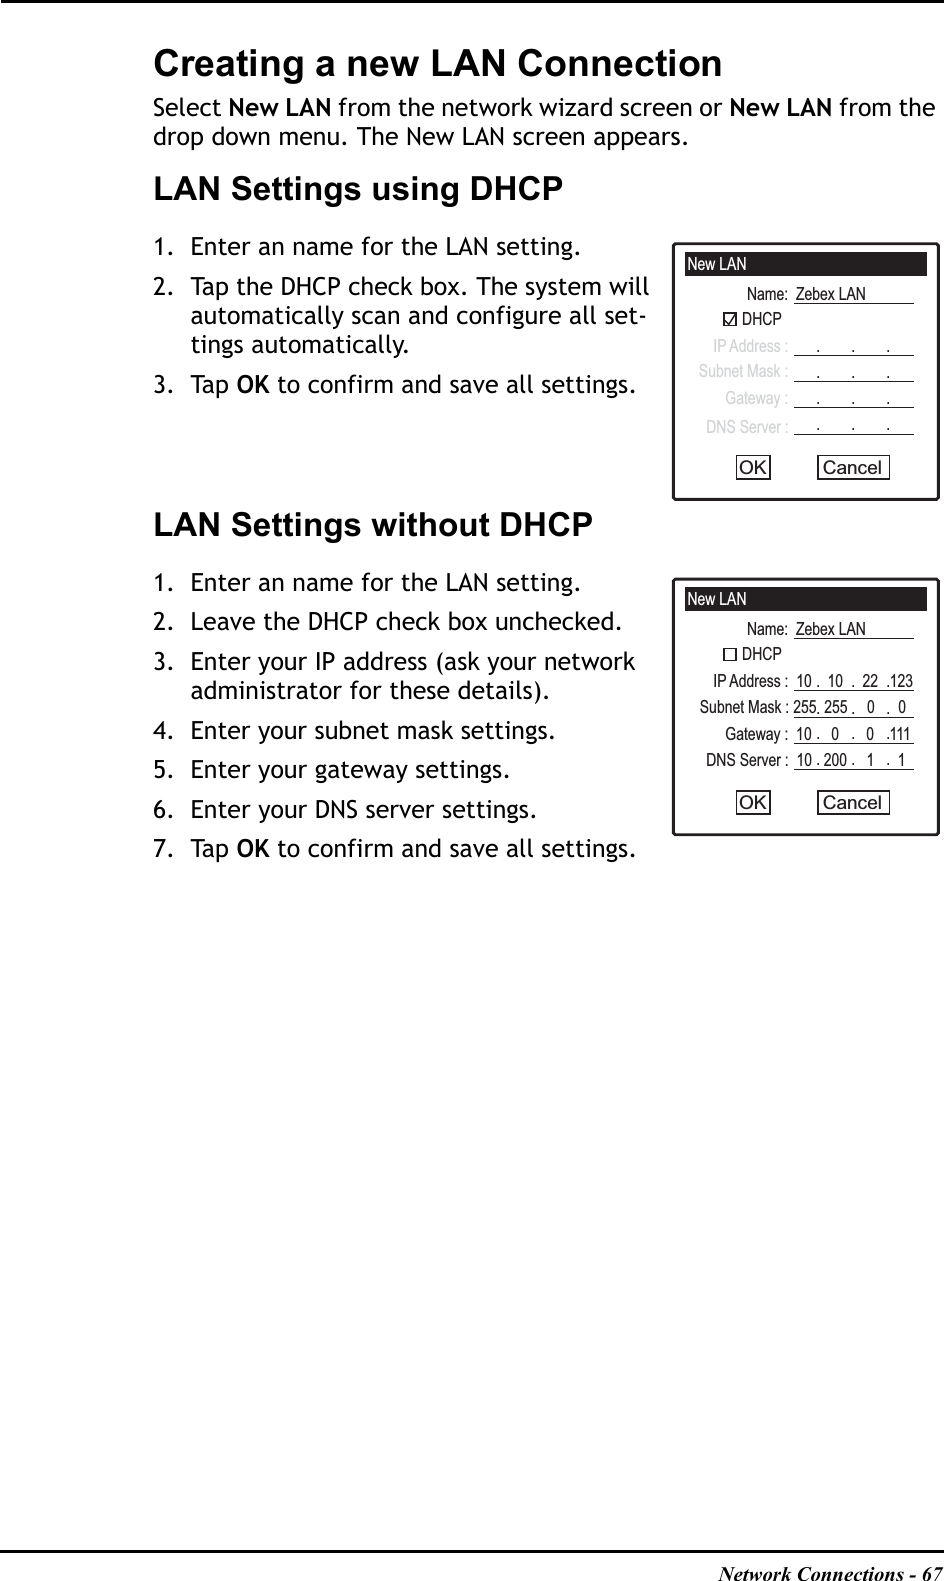 Network Connections - 67Creating a new LAN ConnectionSelect New LAN from the network wizard screen or New LAN from the drop down menu. The New LAN screen appears.LAN Settings using DHCP1. Enter an name for the LAN setting.2. Tap the DHCP check box. The system will automatically scan and configure all set-tings automatically. 3. Tap OK to confirm and save all settings.LAN Settings without DHCP1. Enter an name for the LAN setting.2. Leave the DHCP check box unchecked.3. Enter your IP address (ask your network administrator for these details).4. Enter your subnet mask settings.5. Enter your gateway settings.6. Enter your DNS server settings.7. Tap OK to confirm and save all settings.New LANName:  Zebex LANDHCPIP Address :Subnet Mask :Gateway :DNS Server :CancelOK.        .        ..        .        ..        .        ..        .        .New LANName:  Zebex LANDHCPIP Address :  10    10     22   123Subnet Mask : 255  255     0      0Gateway :  10     0       0    111DNS Server :  10   200     1      1CancelOK.        .        ..        .        ..        .        ..        .        .